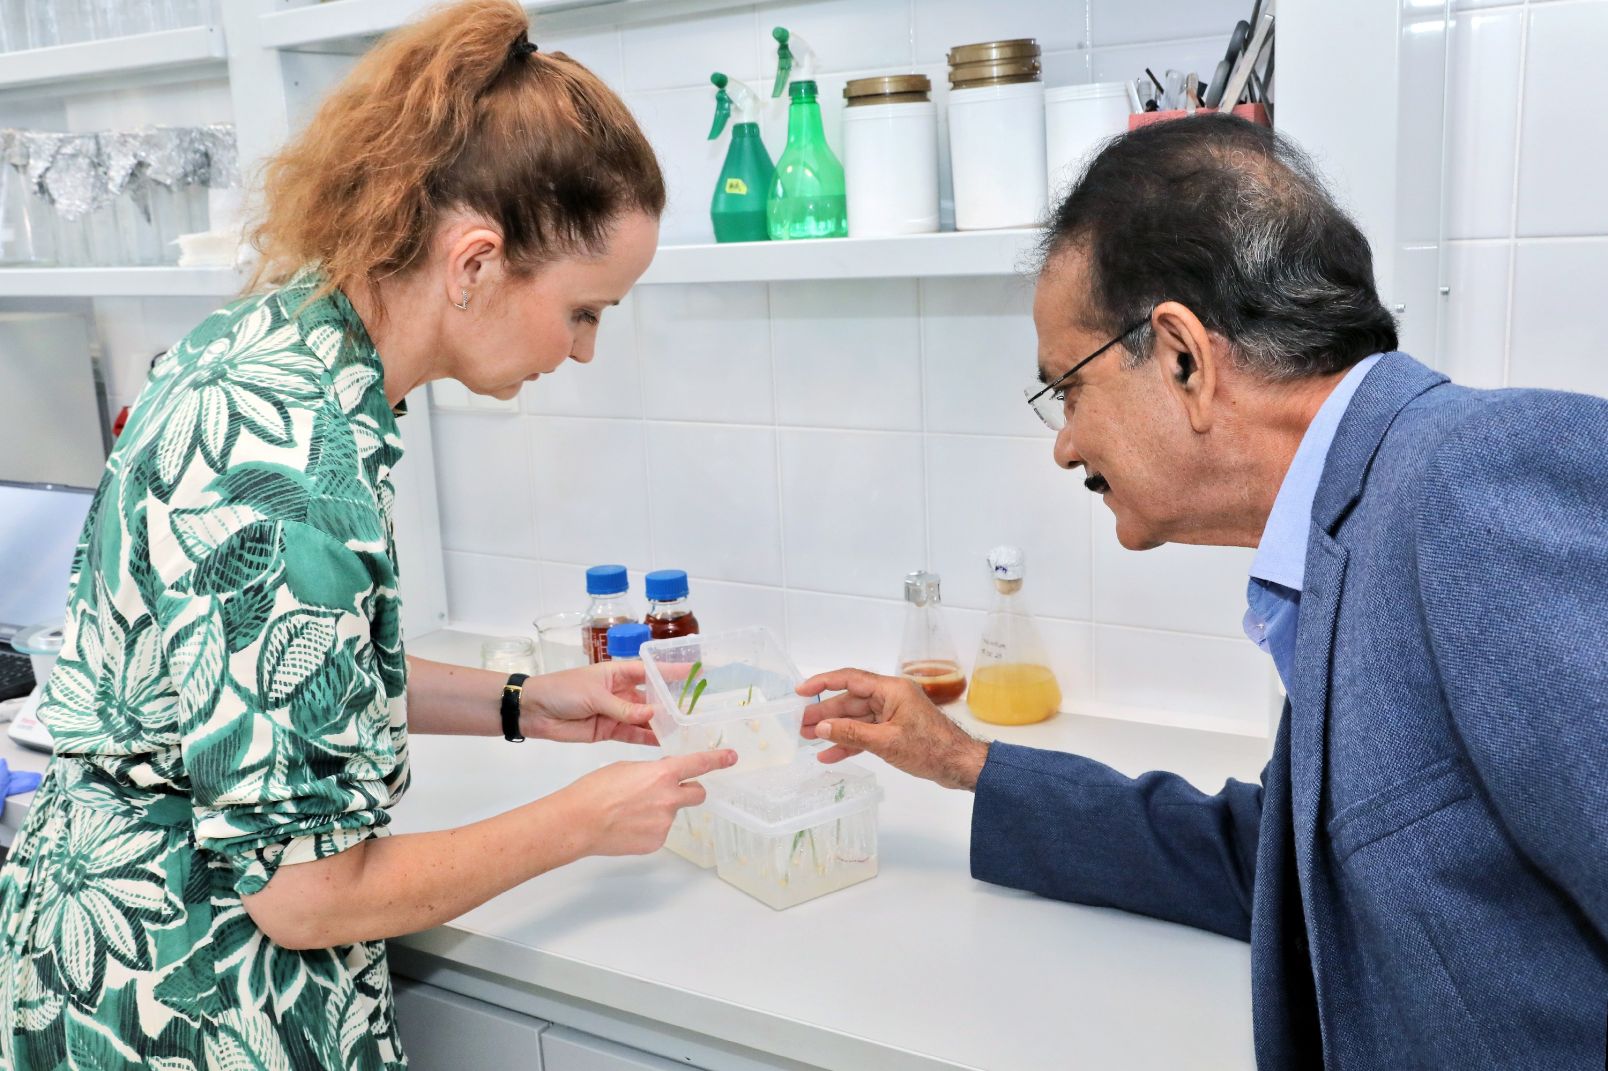 In 2019 Prof. Patrycja Golińska and prof. Mahendra Rai submitted an application to National Agency for Academic Exchange of Poland  for a scholarship which allows recognized scientists to come to Poland 